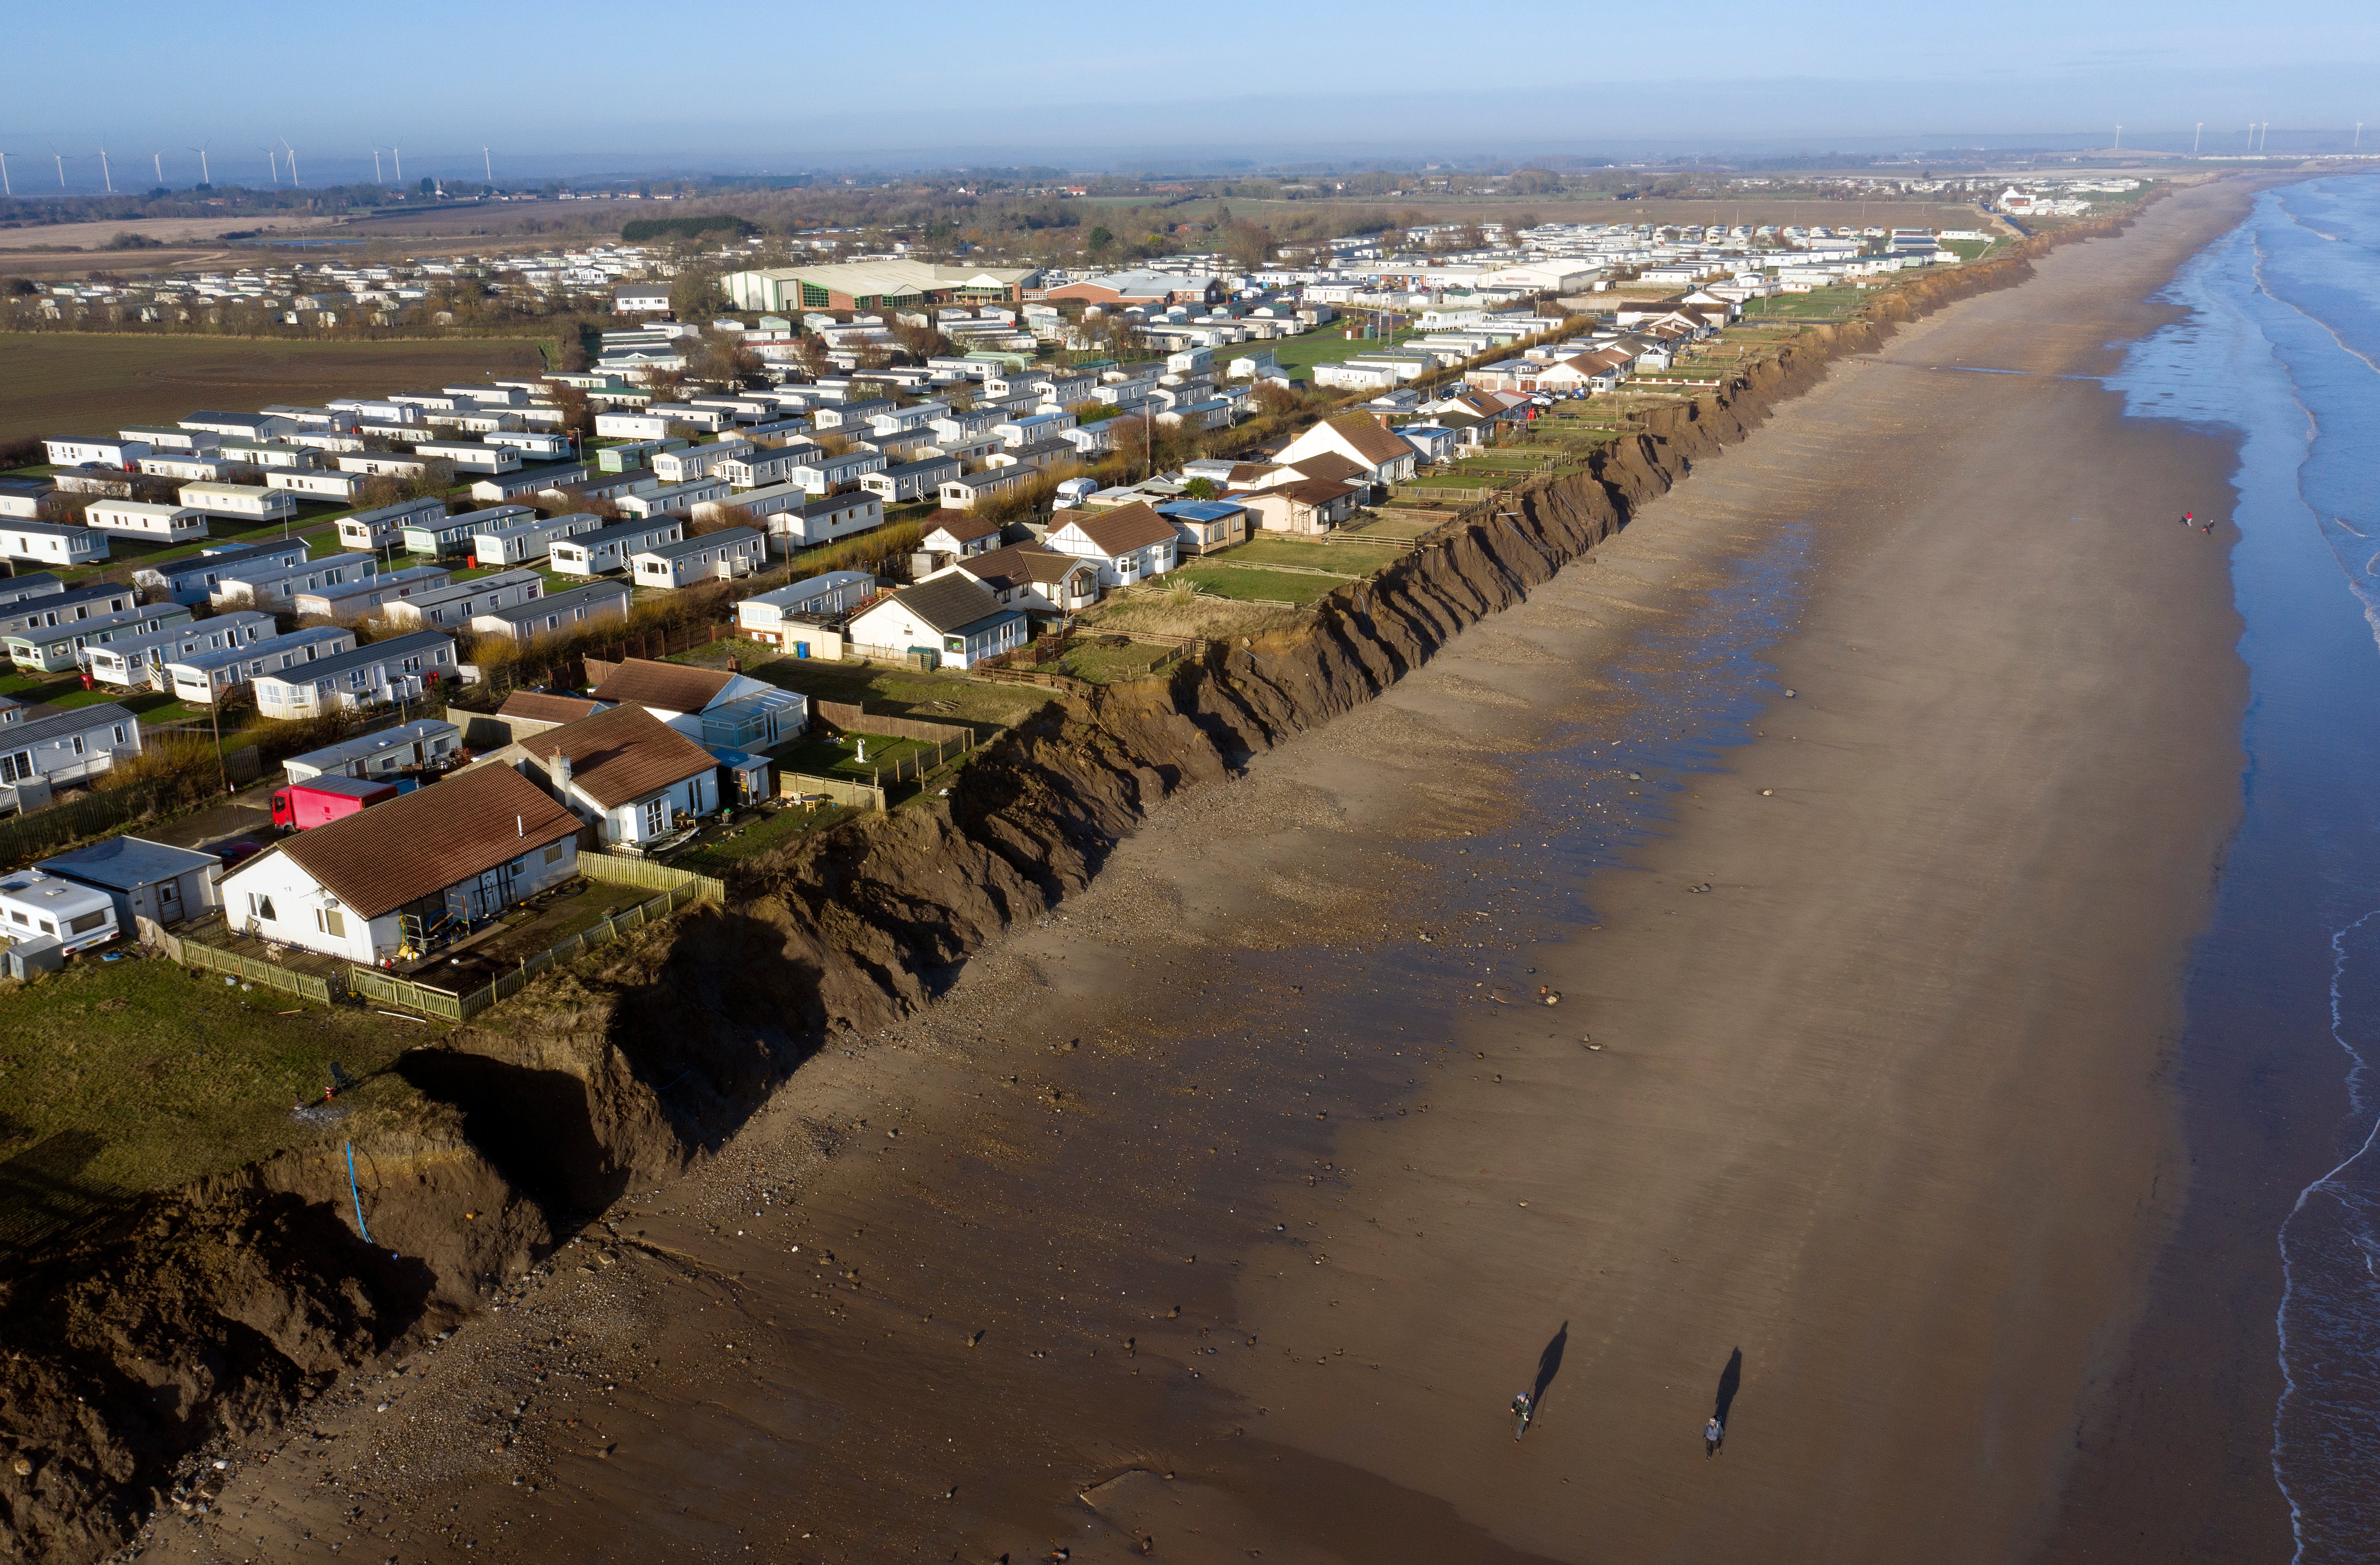 Other parts of England are also seeing coastal erosion, includng the East Riding of Yorkshire